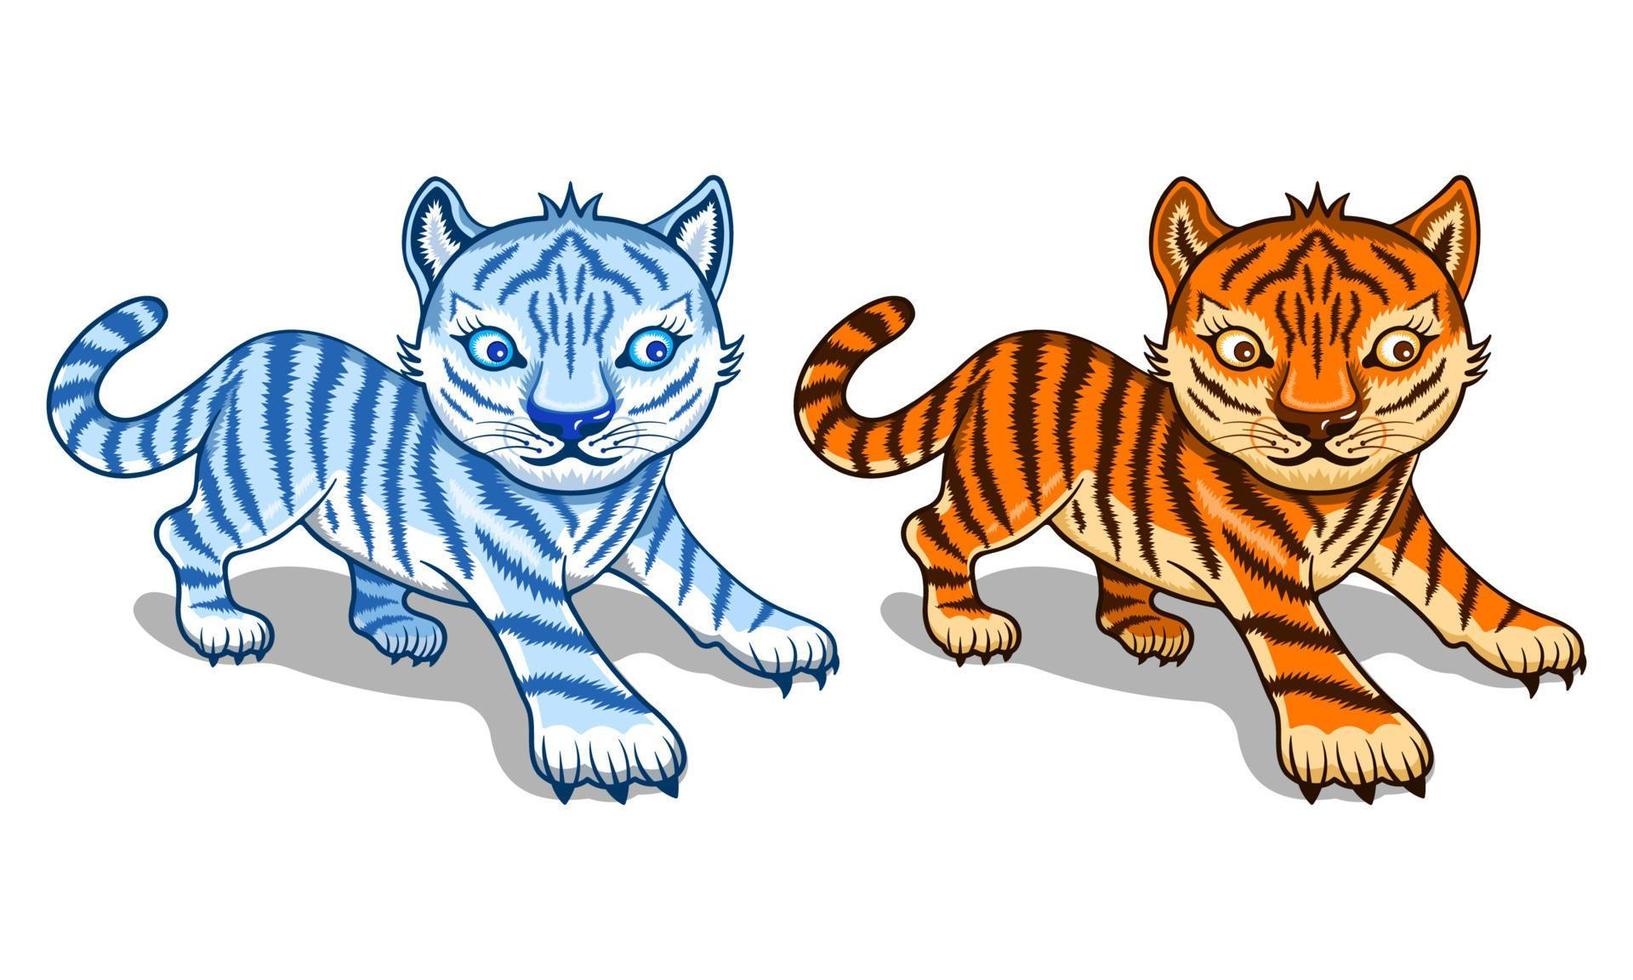 Tiger posing isolated cartoon style vector